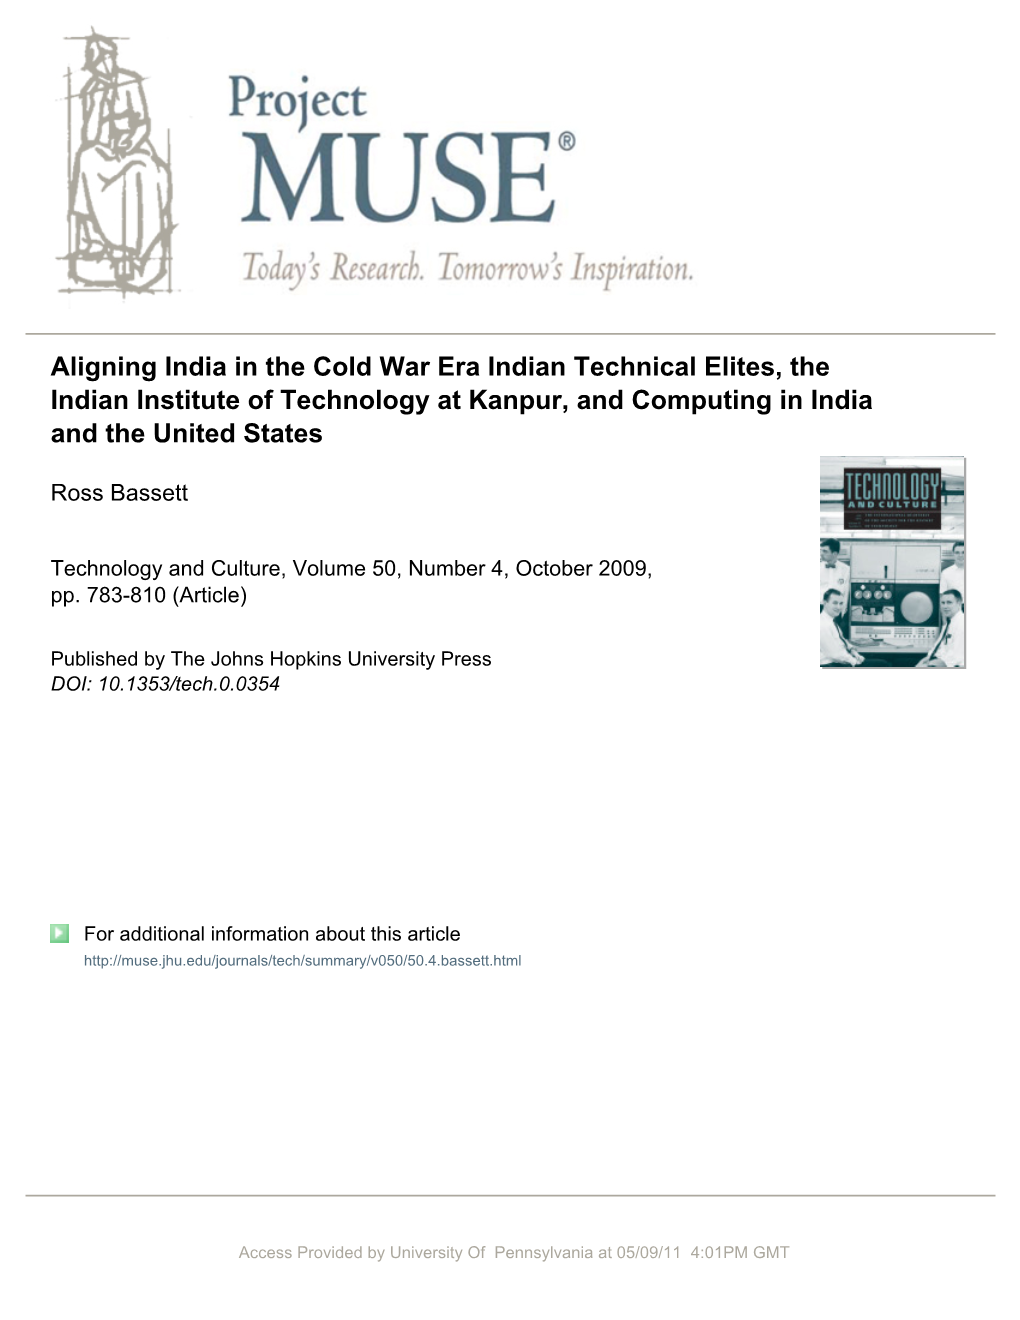 Aligning India in the Cold War Era Indian Technical Elites, the Indian Institute of Technology at Kanpur, and Computing in India and the United States